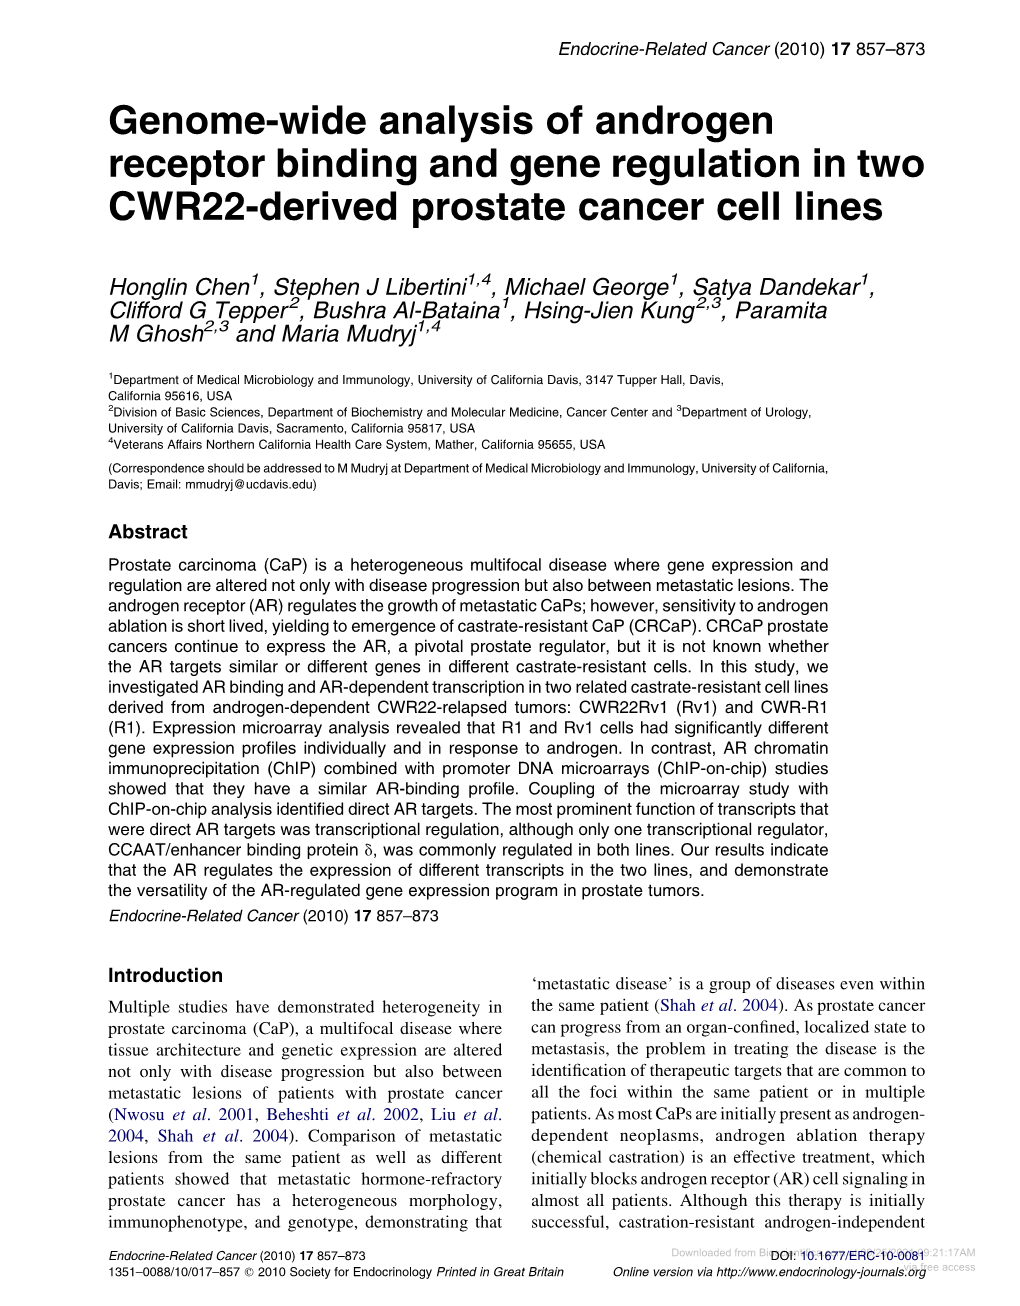 Genome-Wide Analysis of Androgen Receptor Binding and Gene Regulation in Two CWR22-Derived Prostate Cancer Cell Lines